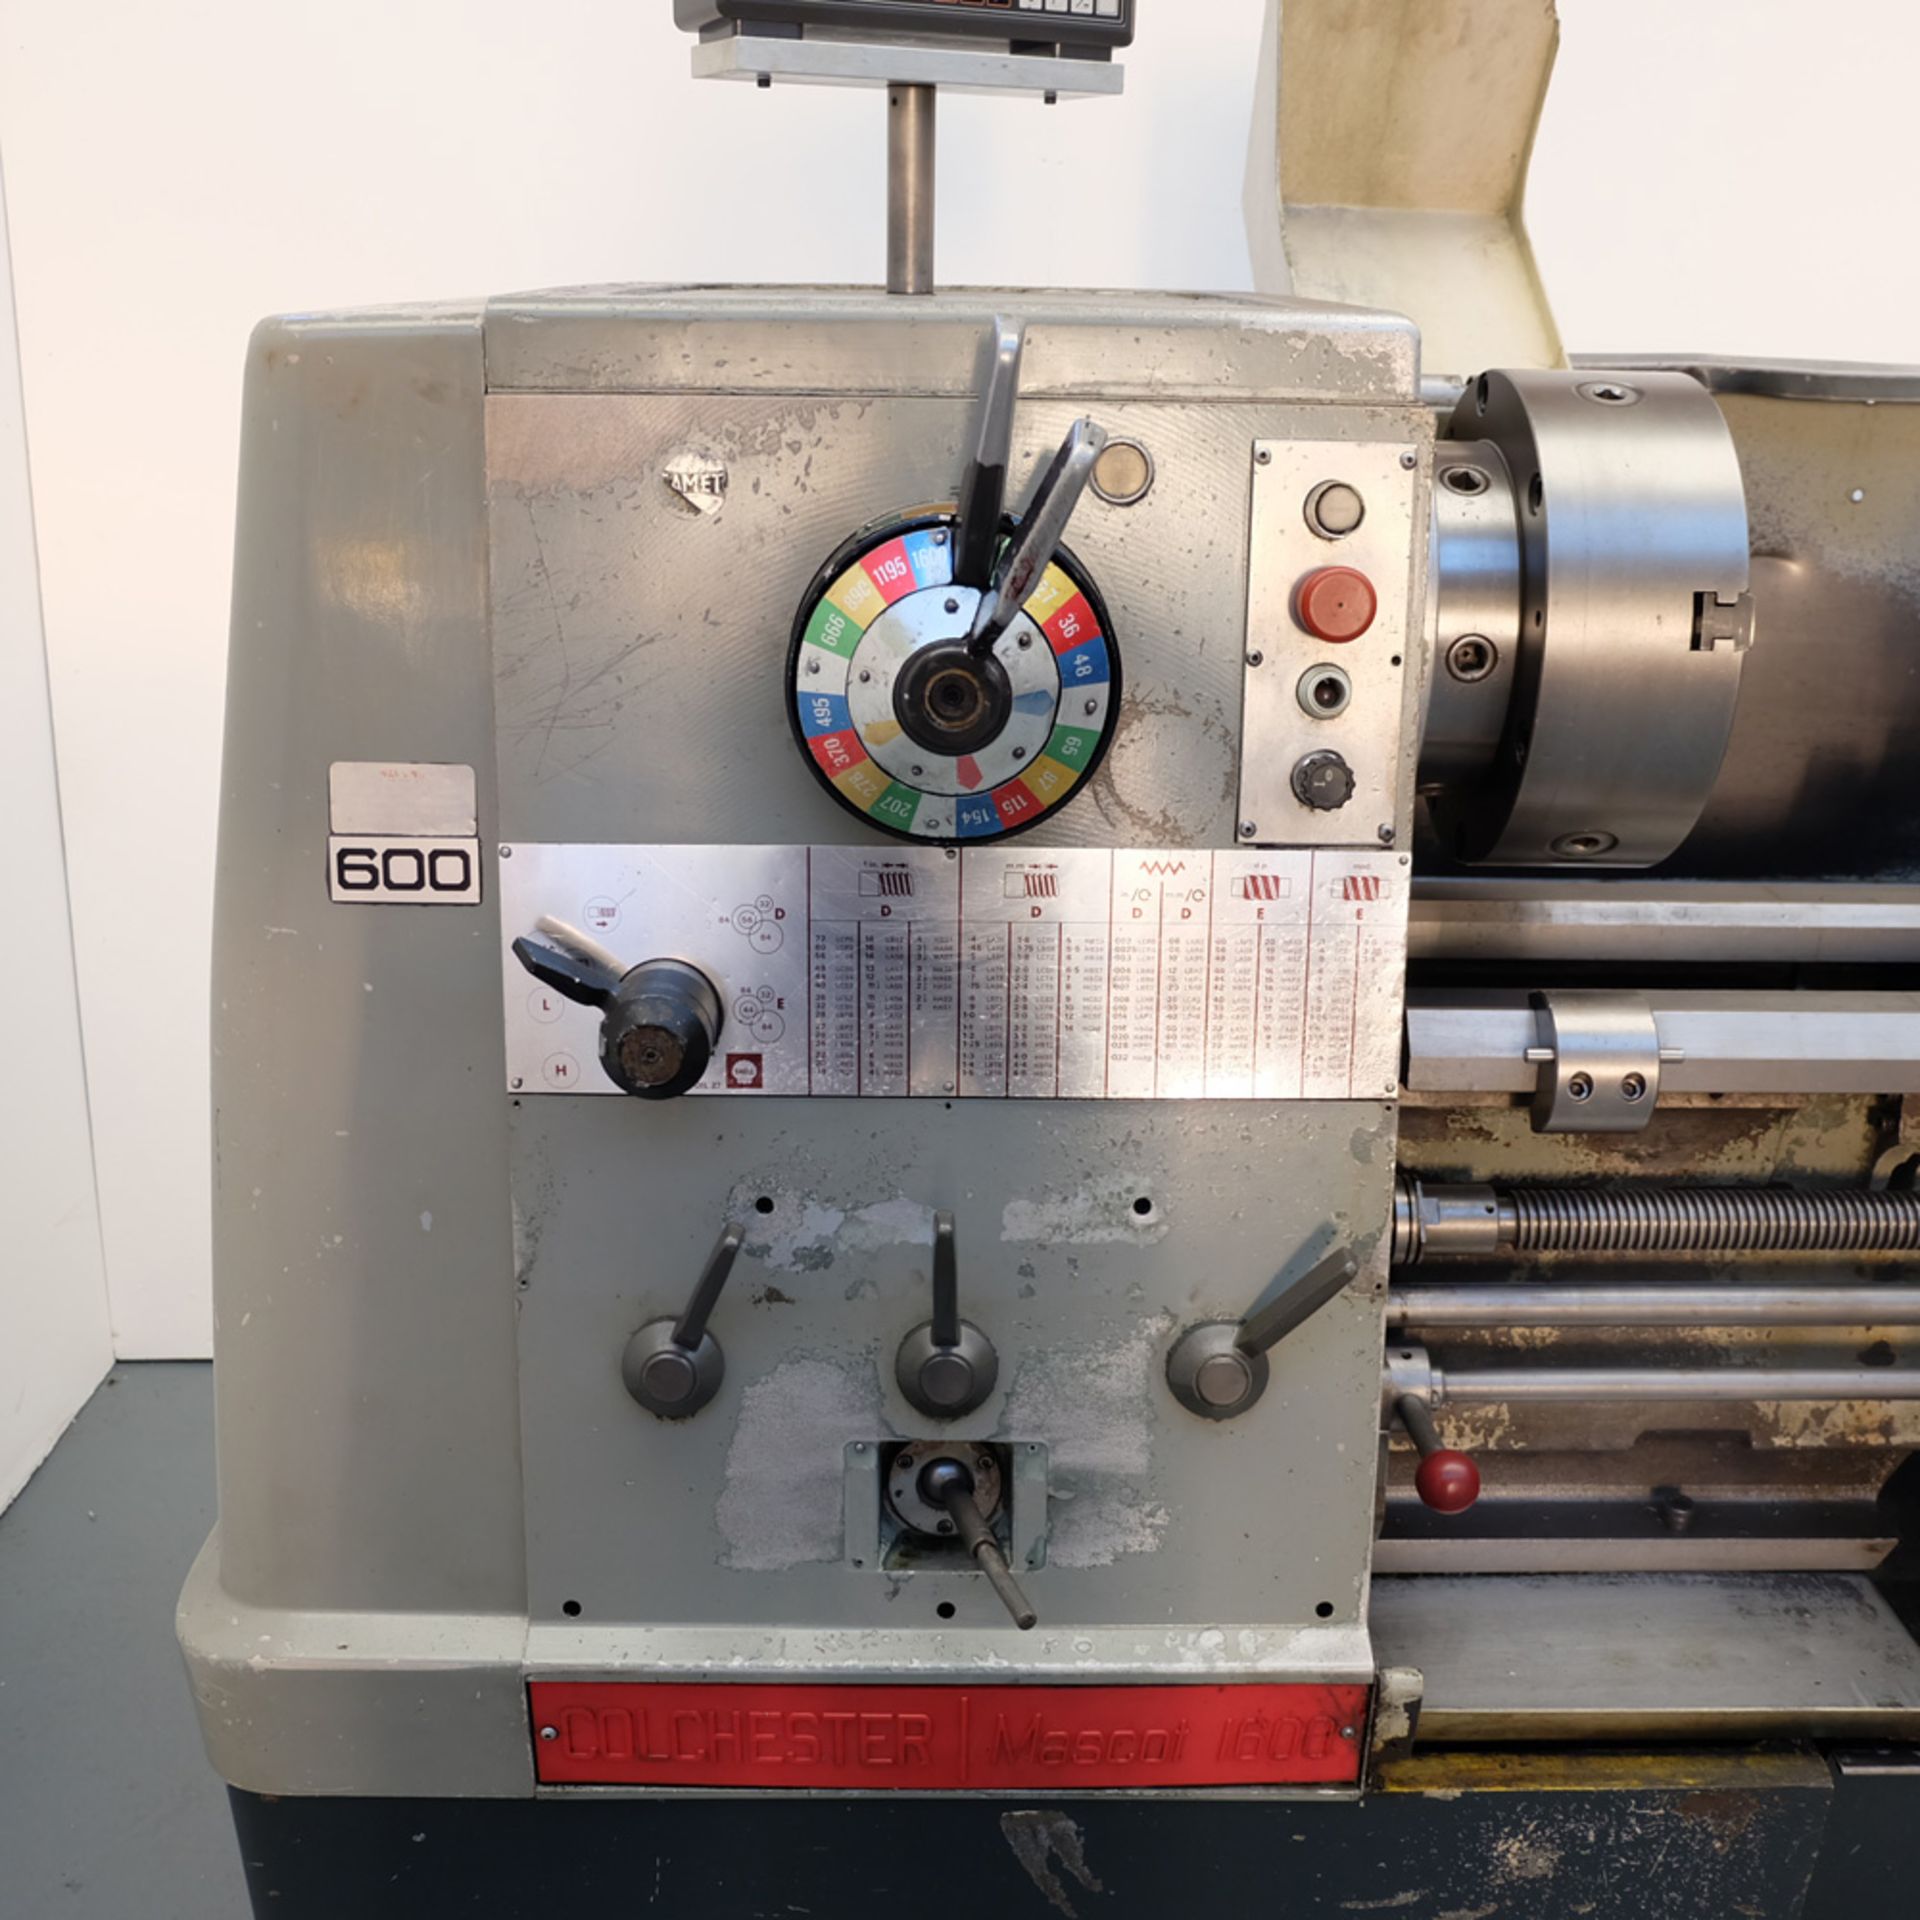 Colchester Mascot 1600 Gap Bed Centre Lathe. Swing Over Bed 17". Swing Over Cross Slide 10 1/2". - Image 2 of 13